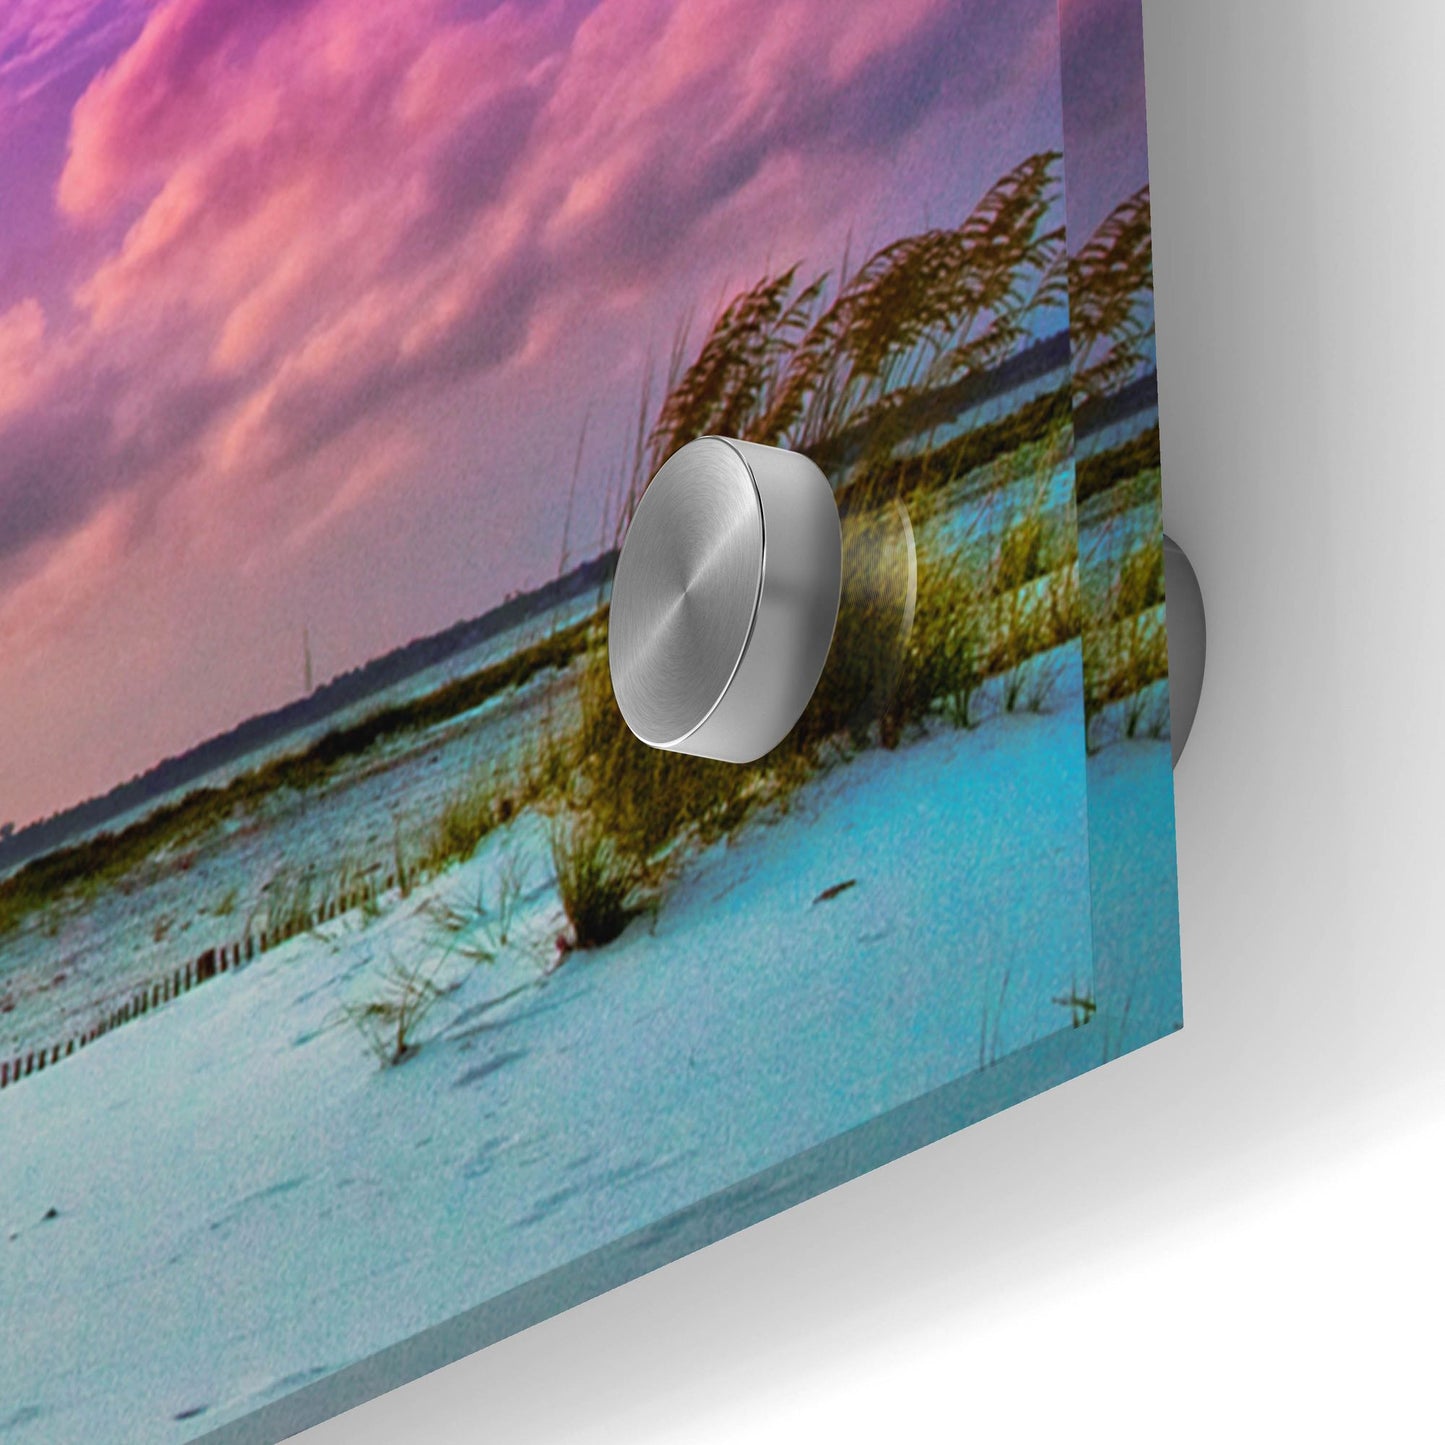 Epic Art 'Purple Clouds Skyscape Sunset Over Beach Sand Dune' by Ezra Tanner, Acrylic Glass Wall Art,48x16